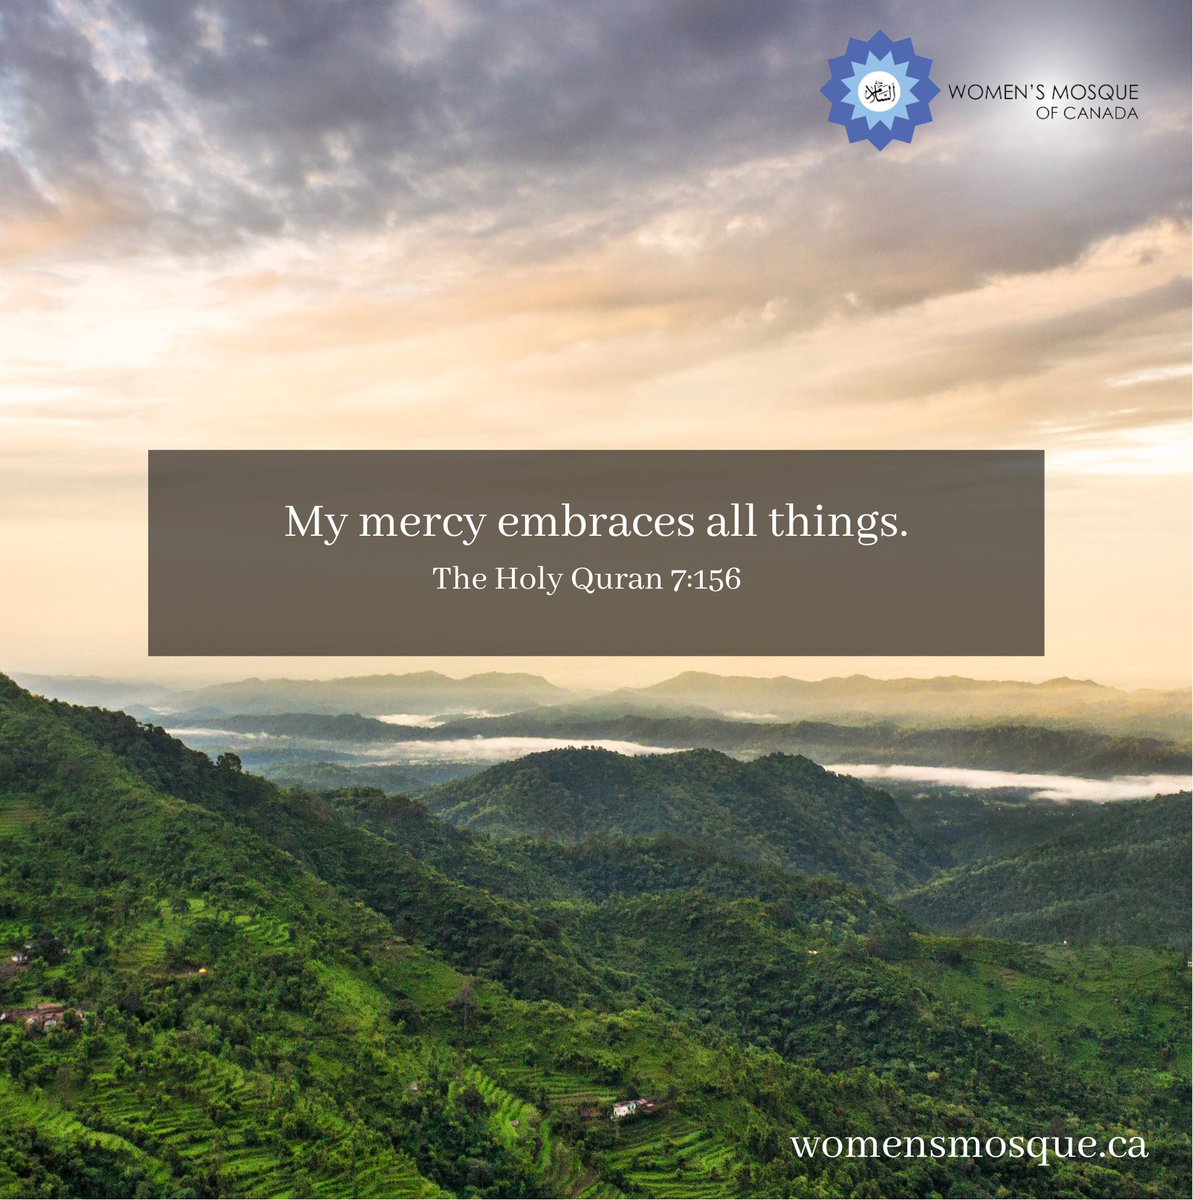 My mercy embraces all things.

The Holy Quran 7:156

#nature #spirituality #religion #quran #quranquotes #quranquote #quranquotesdaily #quranverses #quranverse #quranverseoftheday